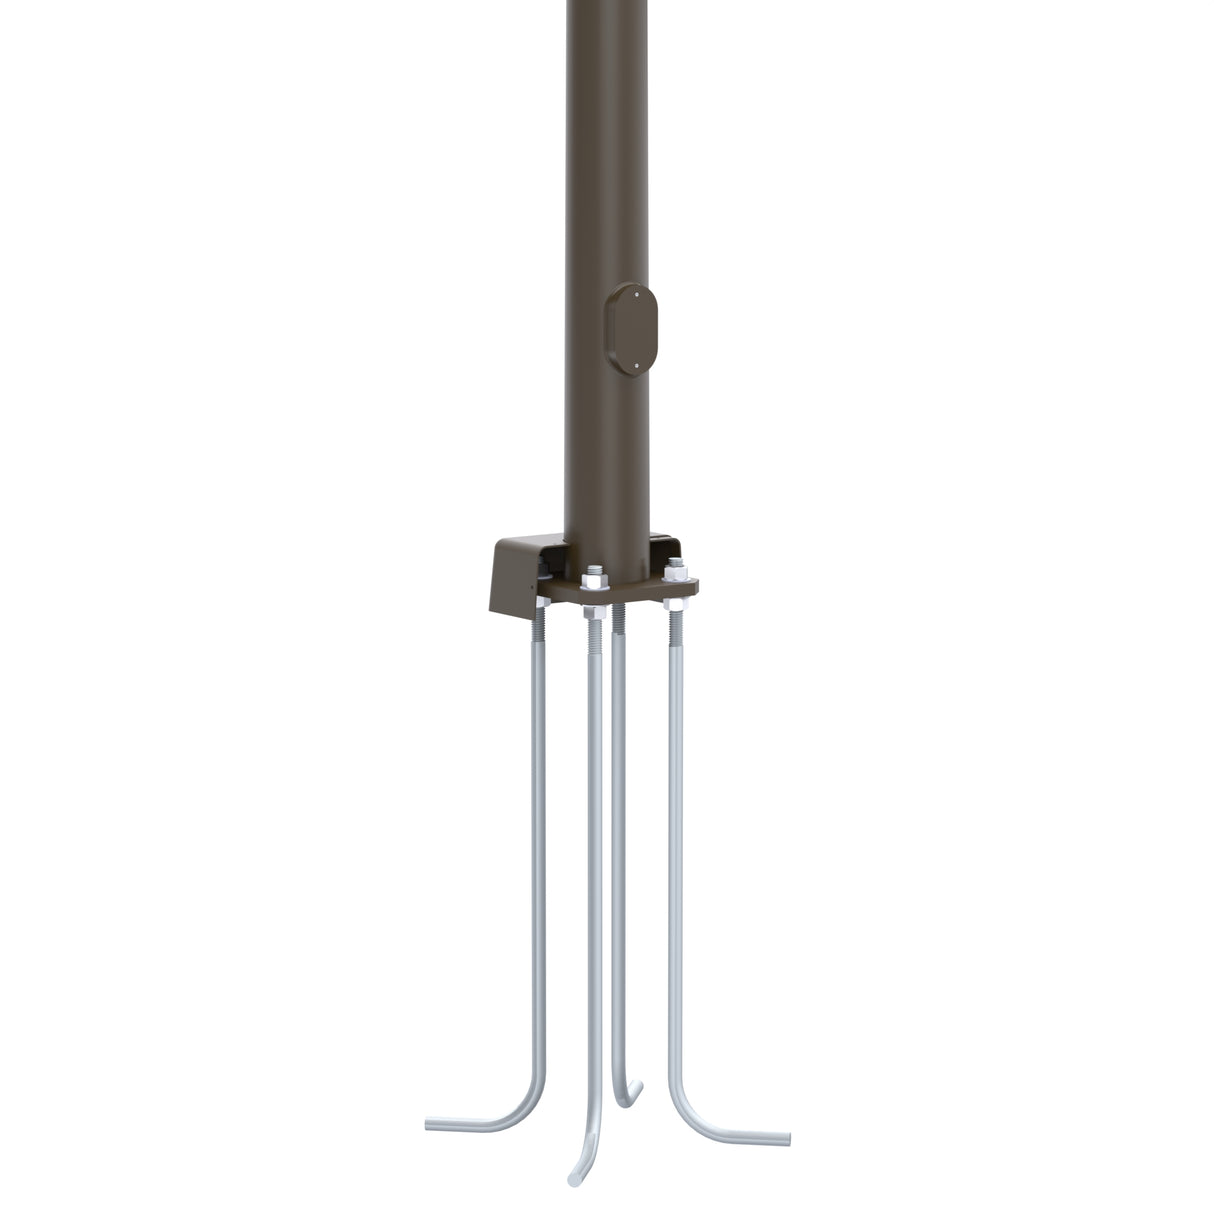 65' Tall x 13" Base OD x 4.3" Top OD x 5 & 7ga Thick, Round Tapered Steel, Anchor Base Light Pole